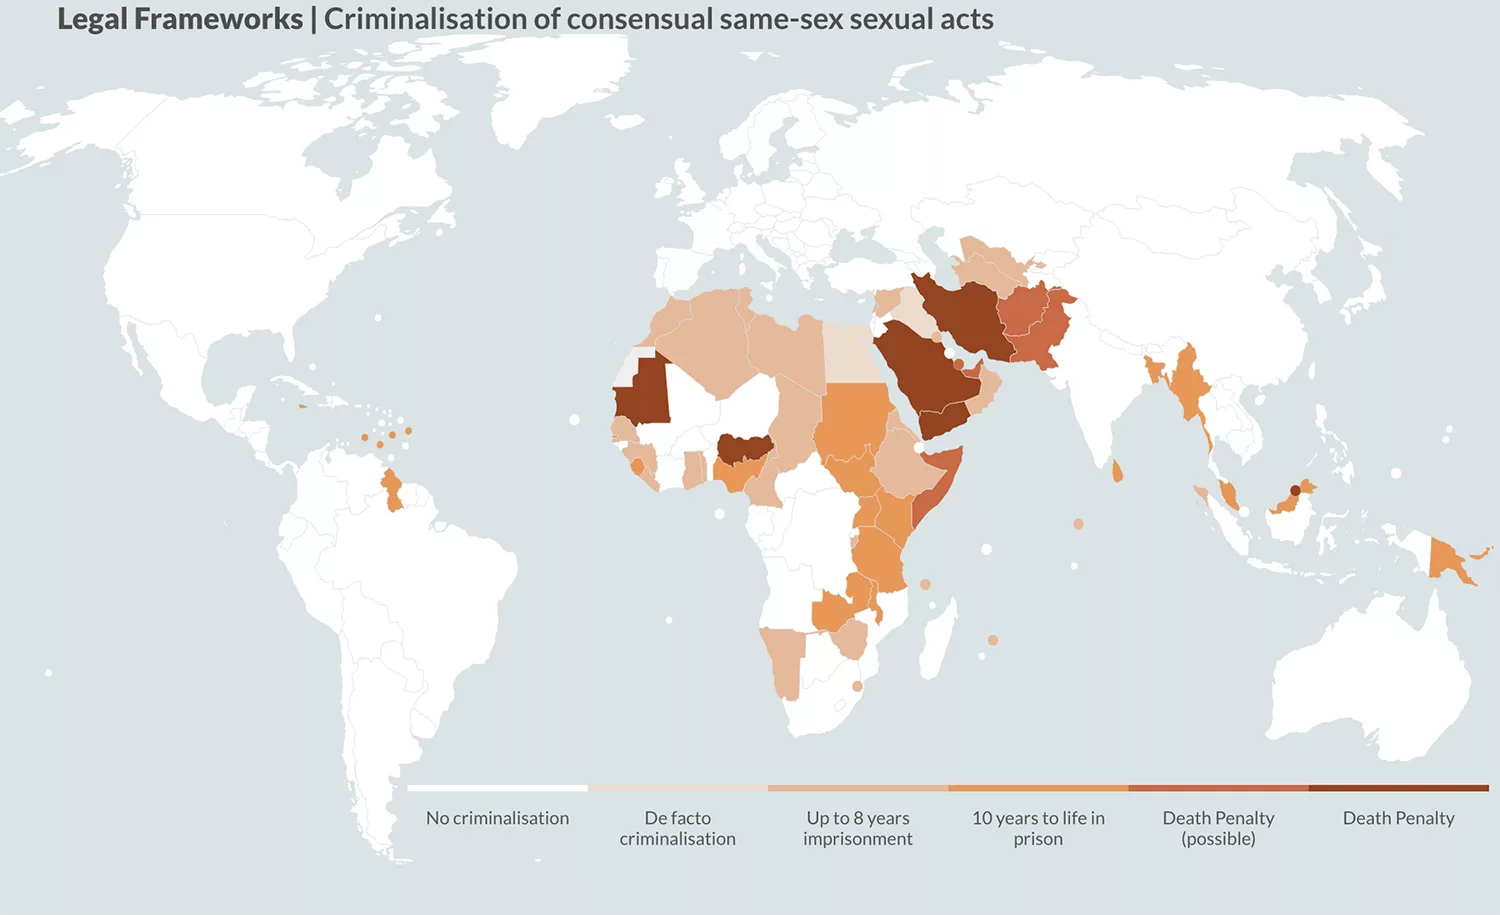 map of criminalisation of consenual same-sex sexual acts